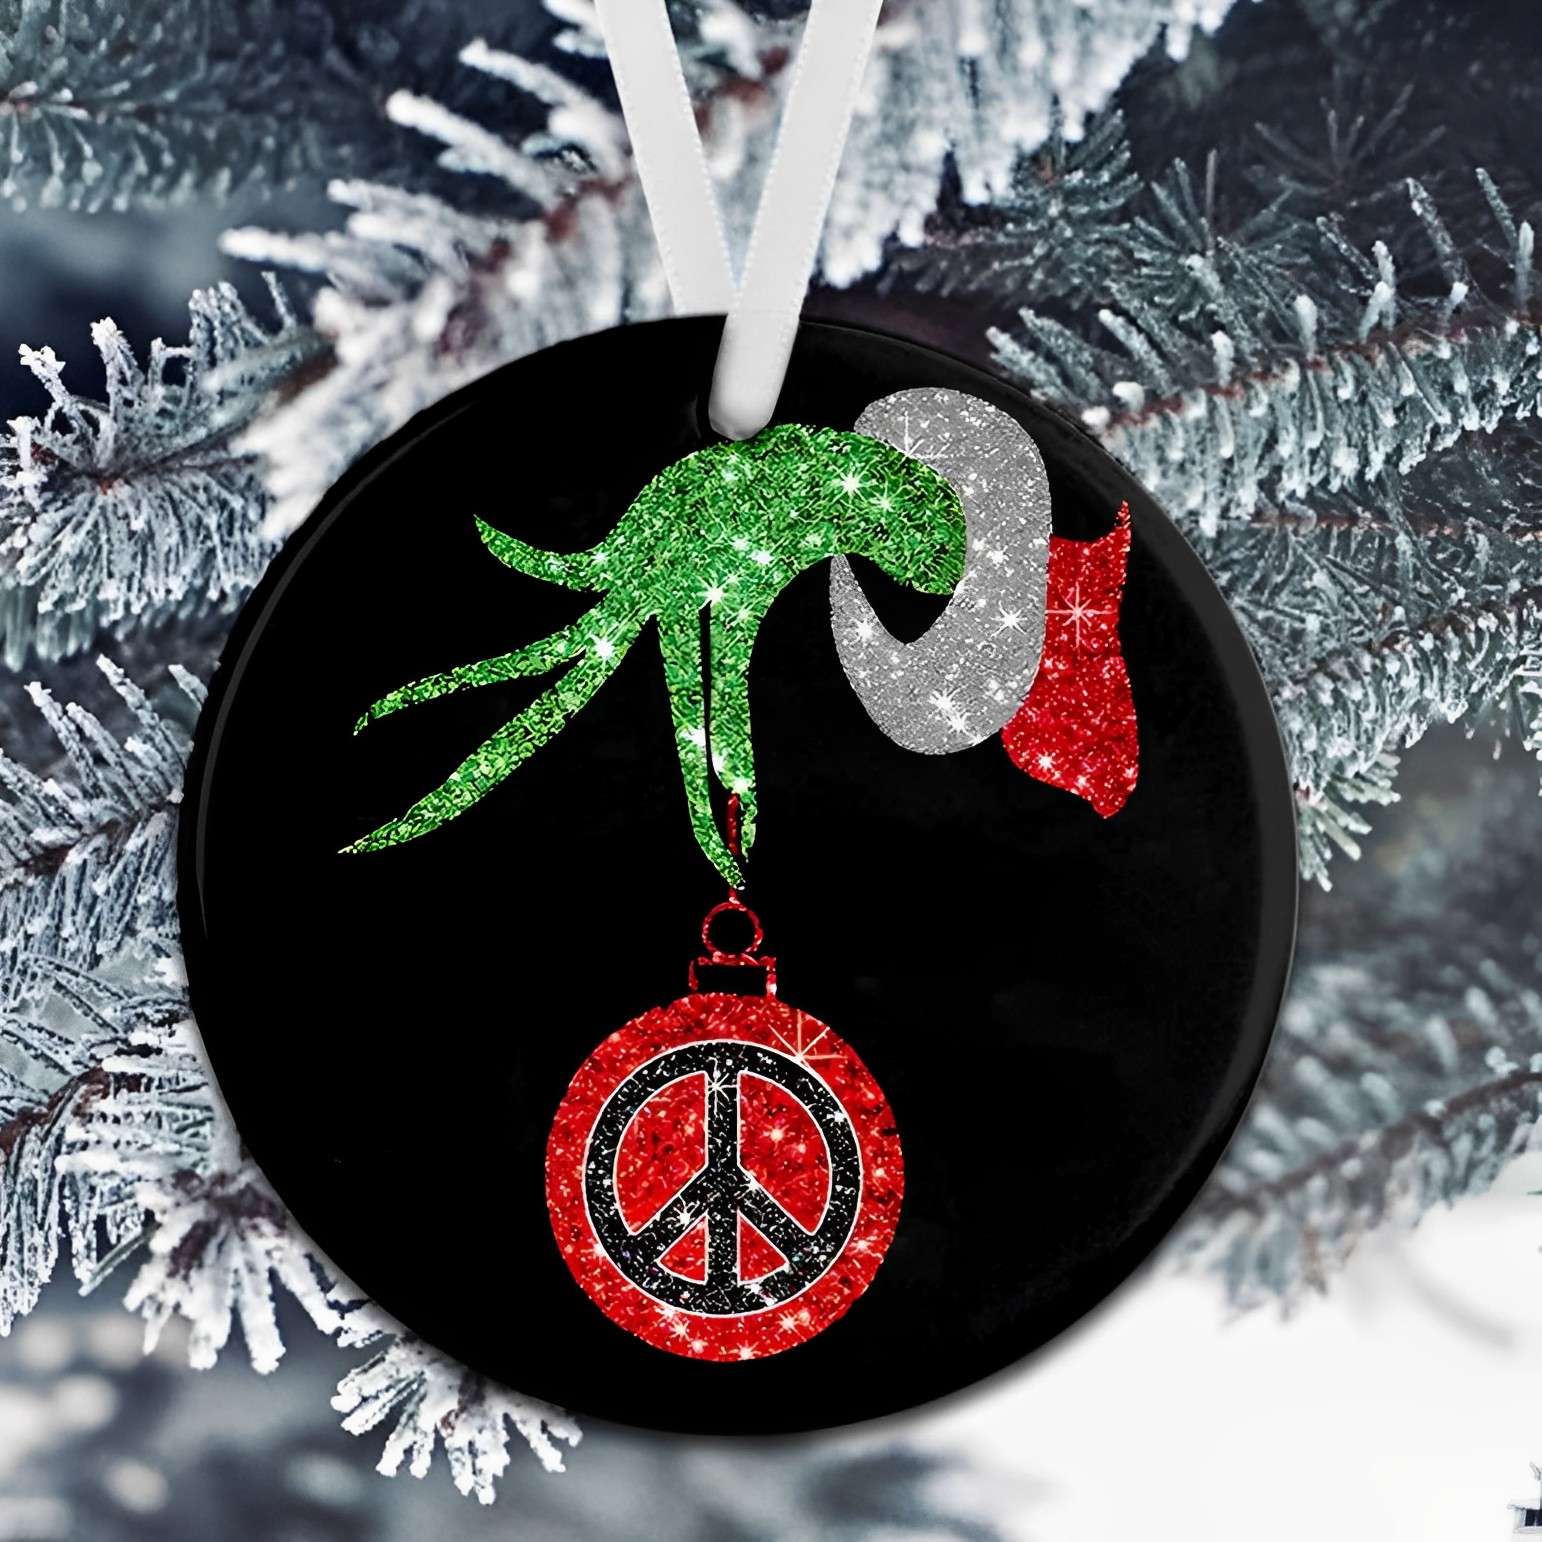 Hippie Sign Grinch Hand Holding Ornament Christmas, The Grinch Ornaments